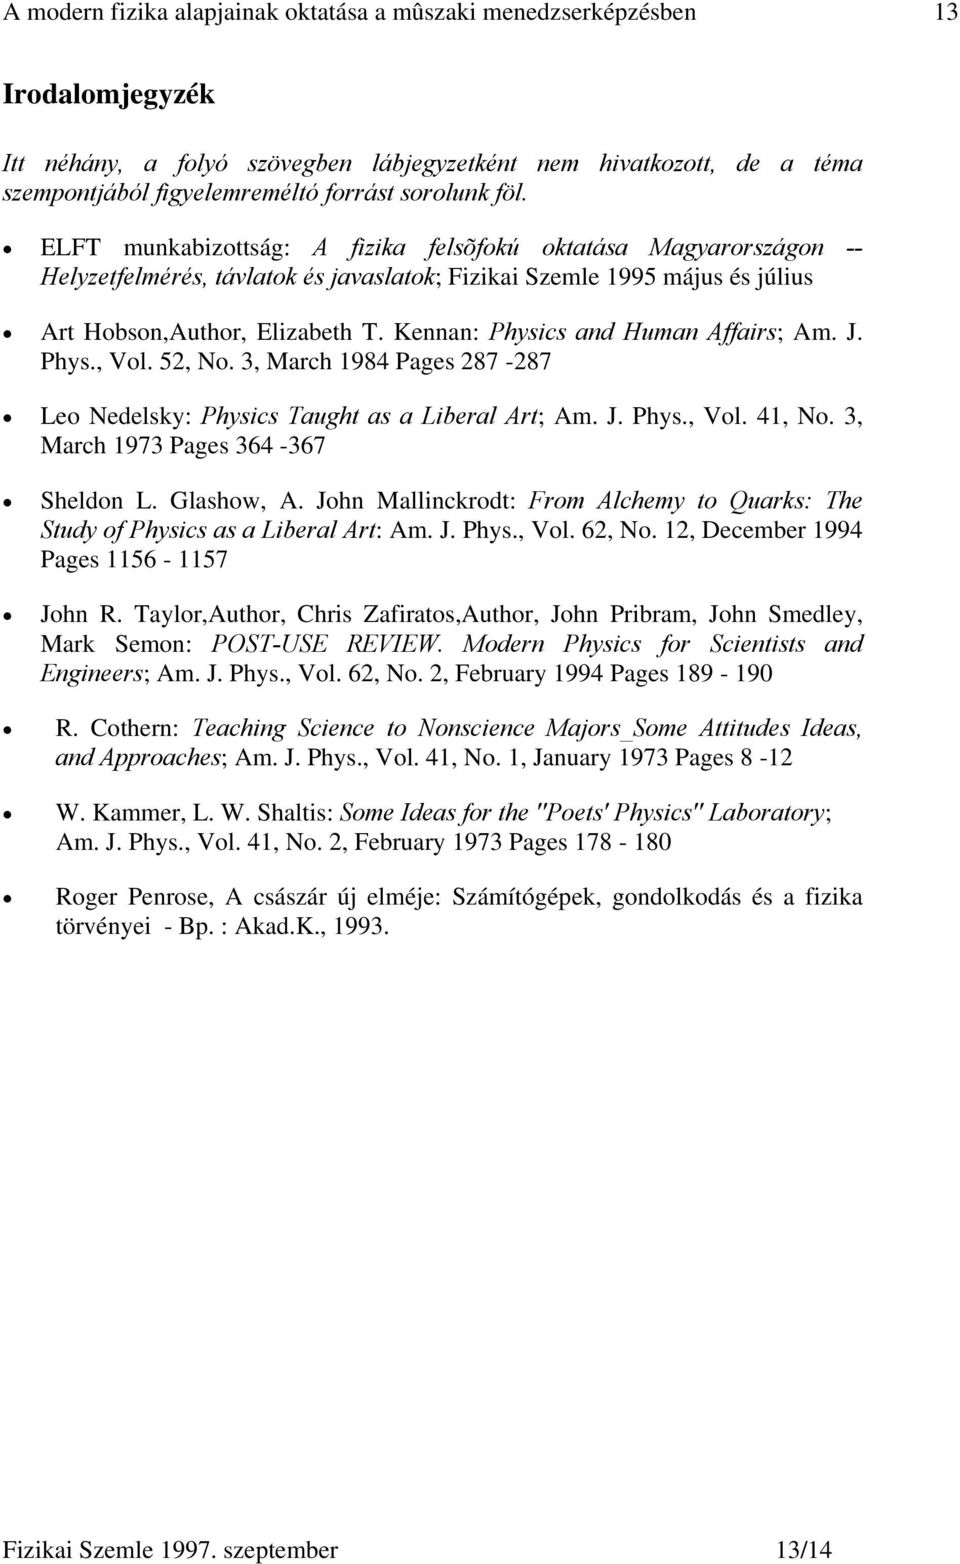 Kennan: Physics and Human Affairs; Am. J. Phys., Vol. 52, No. 3, March 1984 Pages 287-287 Leo Nedelsky: Physics Taught as a Liberal Art; Am. J. Phys., Vol. 41, No.